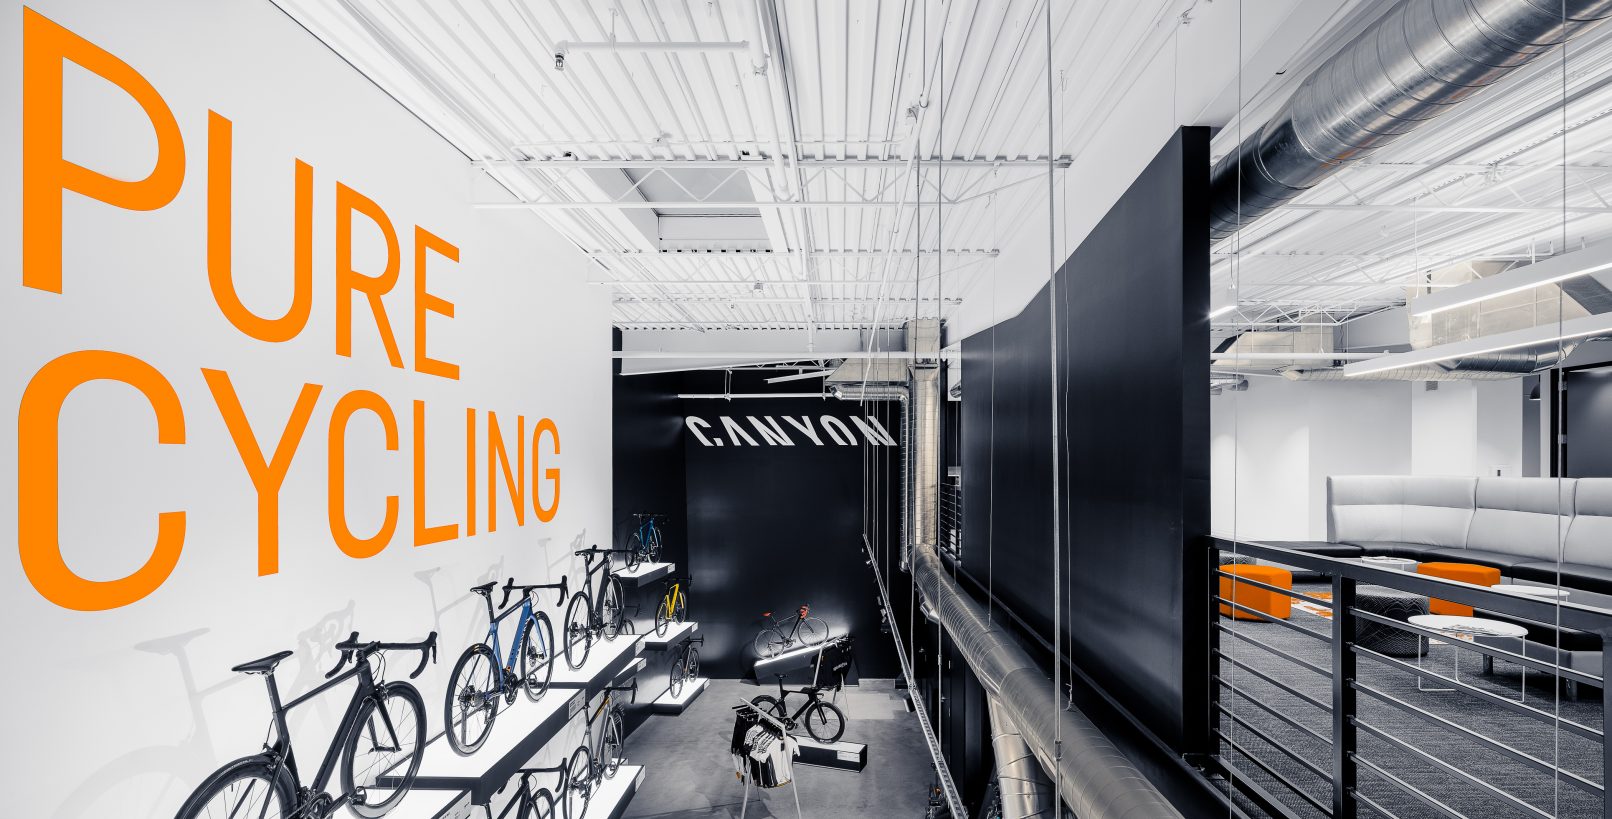 Commercial Interior Design Photography of the Canyon Bicycle Store in Carlsbad California featuring a stark black and white interior with Orange text stating Pure Cycling and White text stating Canyon on the walls and a wall of bicycles displayed on cantilevered shelves on the left and exposed ductwork on the right